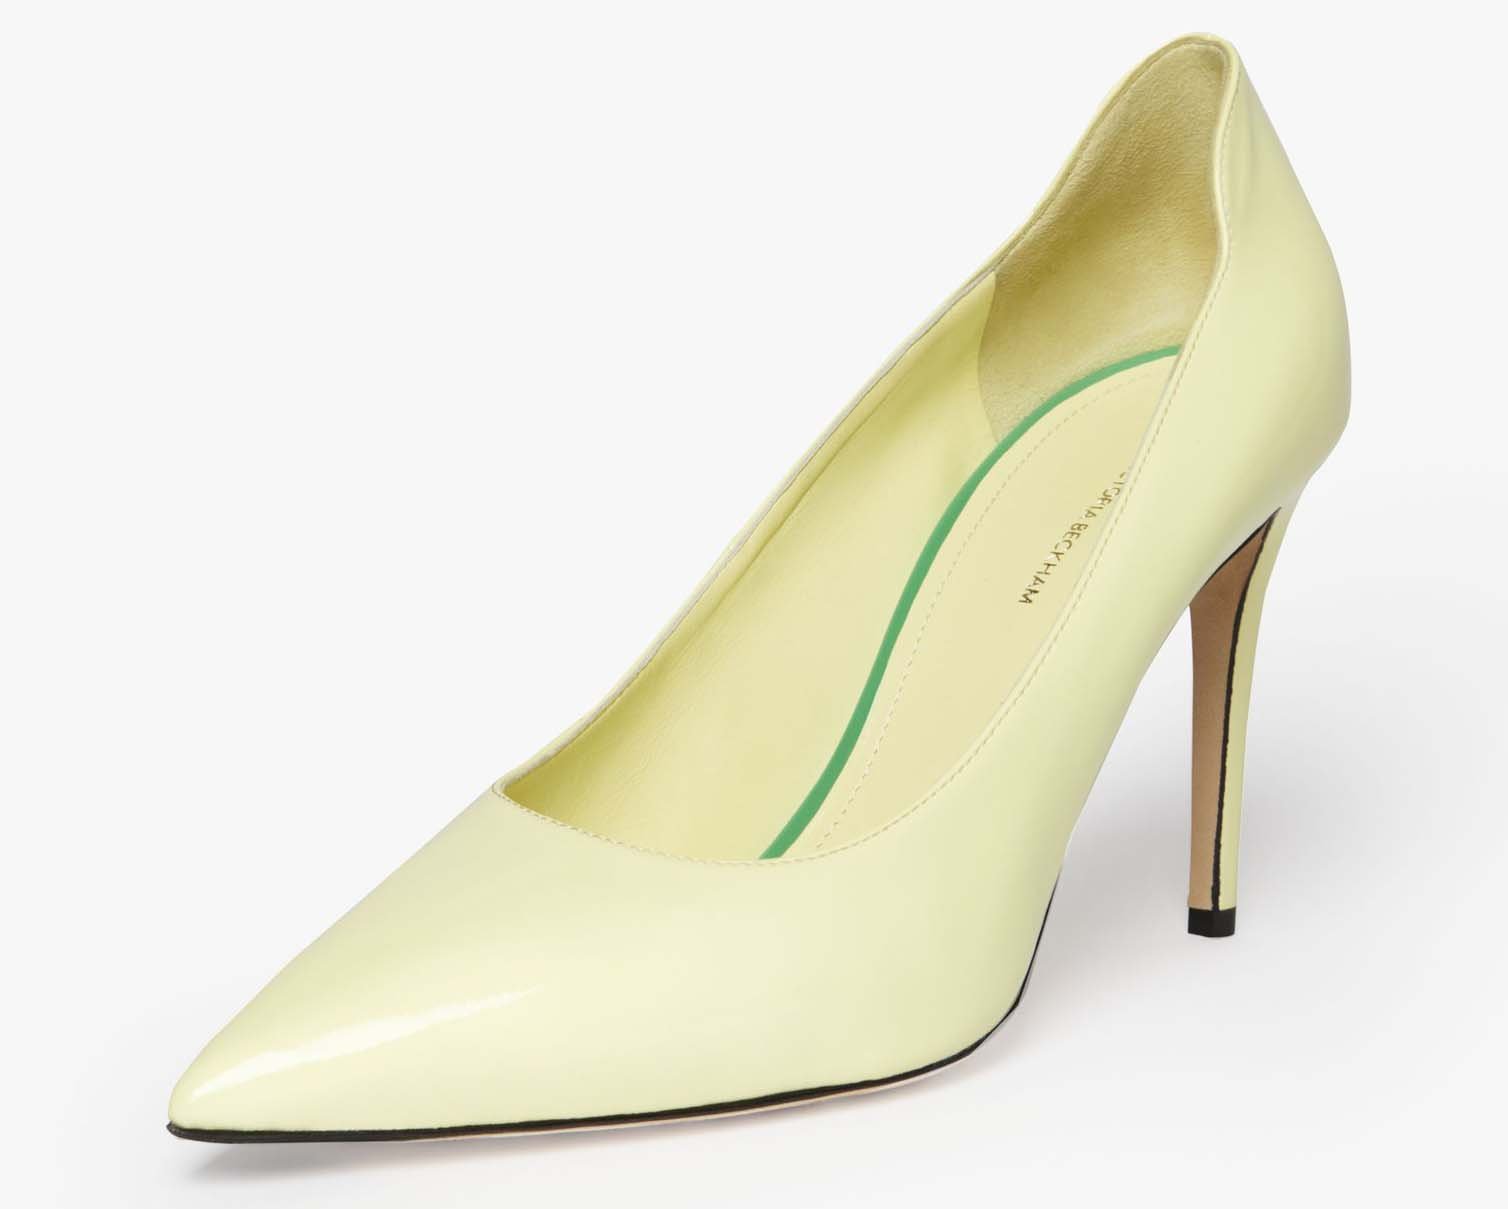 These pumps feature a classic silhouette with elegant back and high stiletto heels